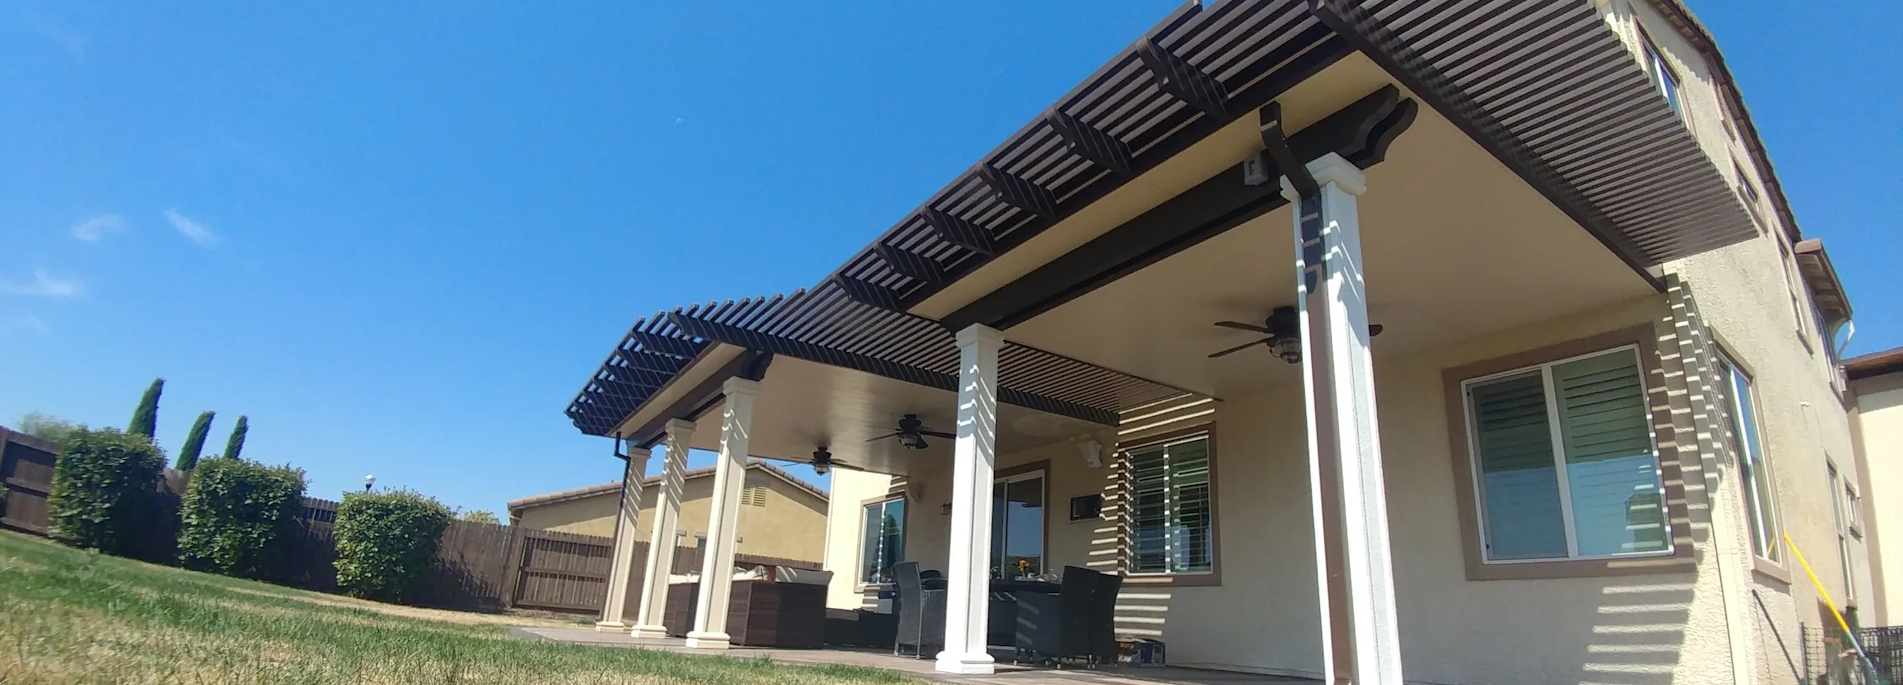 Aluminum patio cover Installer West Sacramento CA Solid Ceiling, Lattice tip or combination of patio covers available Patio cover design and installation in the Sacramento area